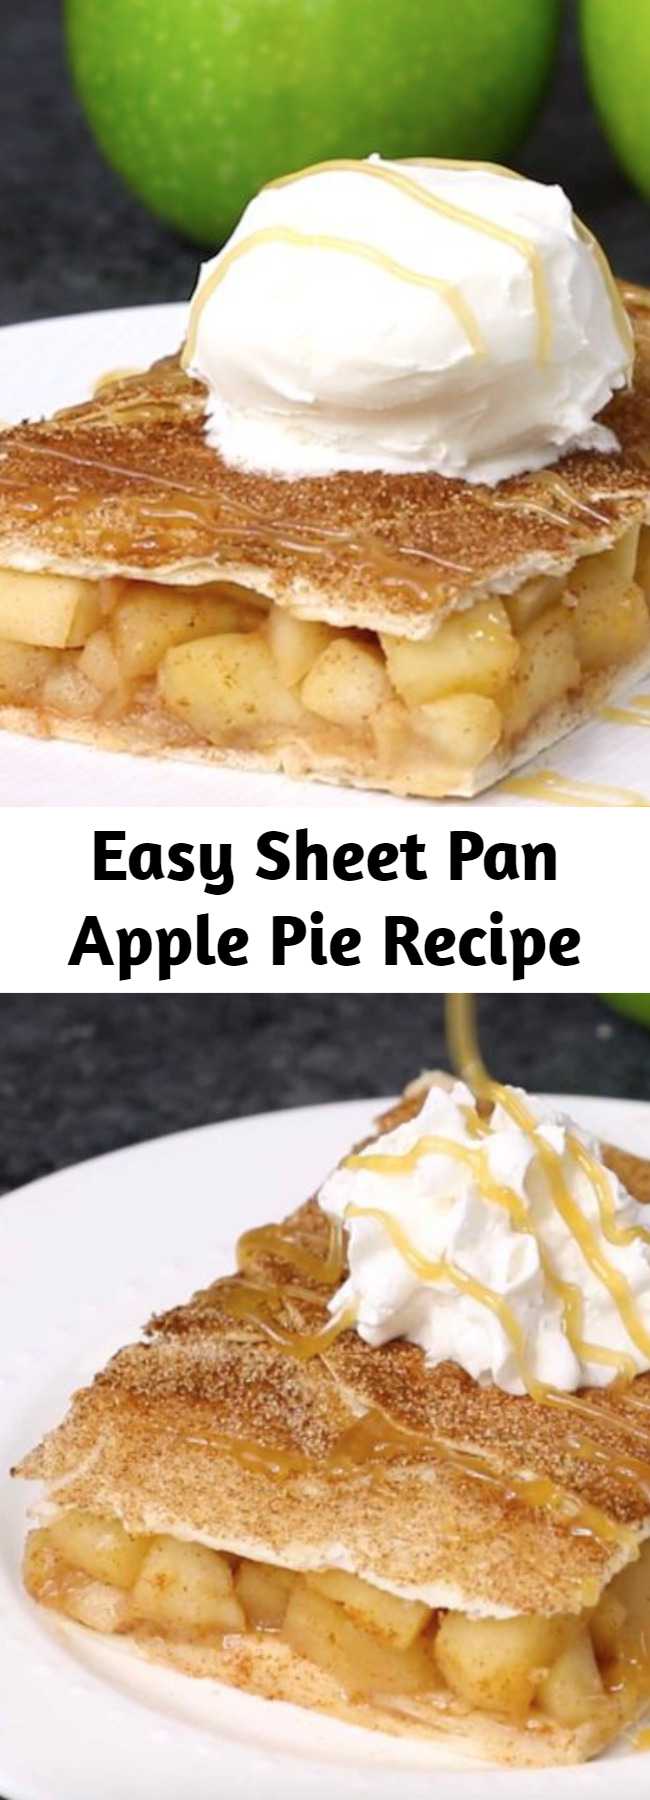 Easy Sheet Pan Apple Pie Recipe - Sheet Pan Apple Pie Bake is perfect when you need a dessert to feed a crowd at a party or the entire family. It’s so much easier to make than traditional apple pie. It’s a slab pie made with a tortilla crust and baked in a sheet pan. This easy recipe takes just over half-an-hour and uses 6 ingredients! Serve it with ice cream, whipped cream or caramel sauce for an amazing dessert!